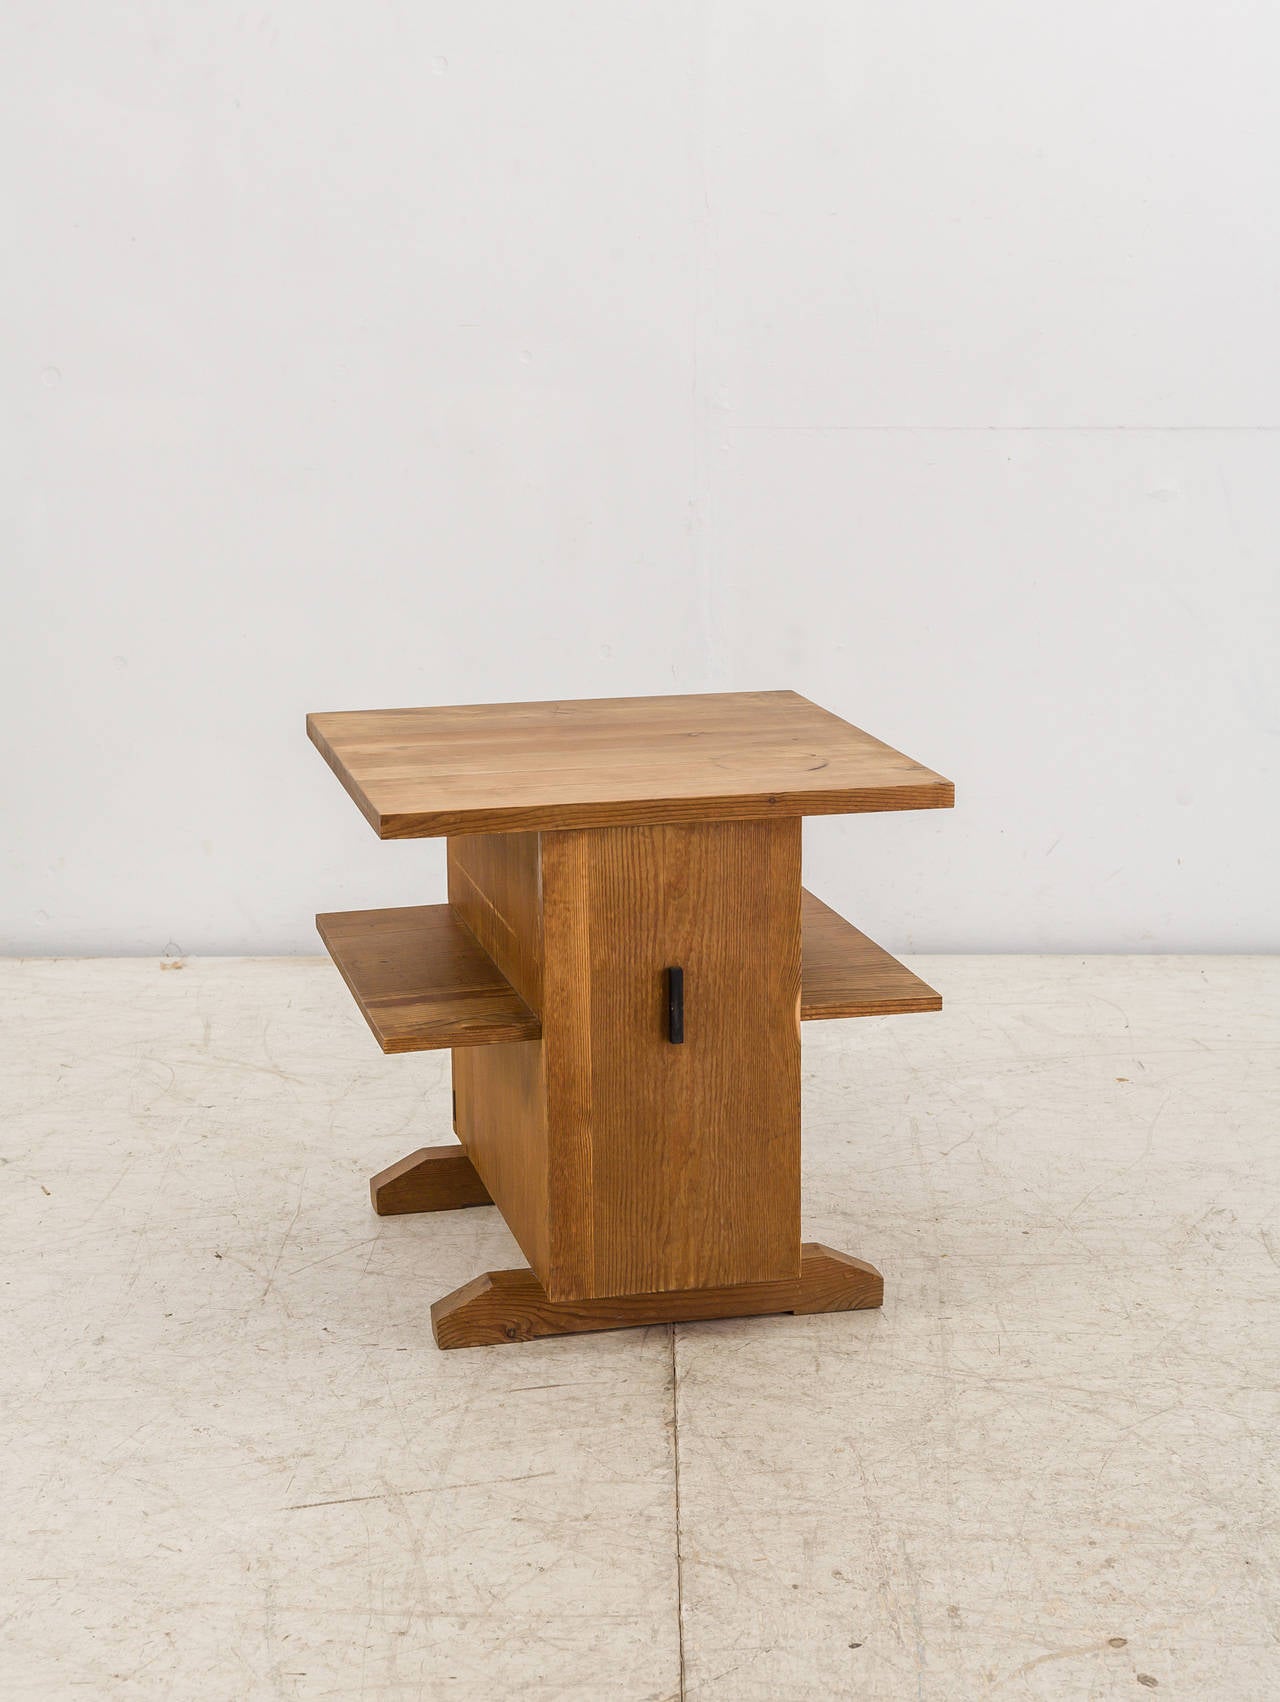 Mid-20th Century Small Coffee Table, Mini Bar or Bedside Table in Pine from Sweden, 1930s-1940s